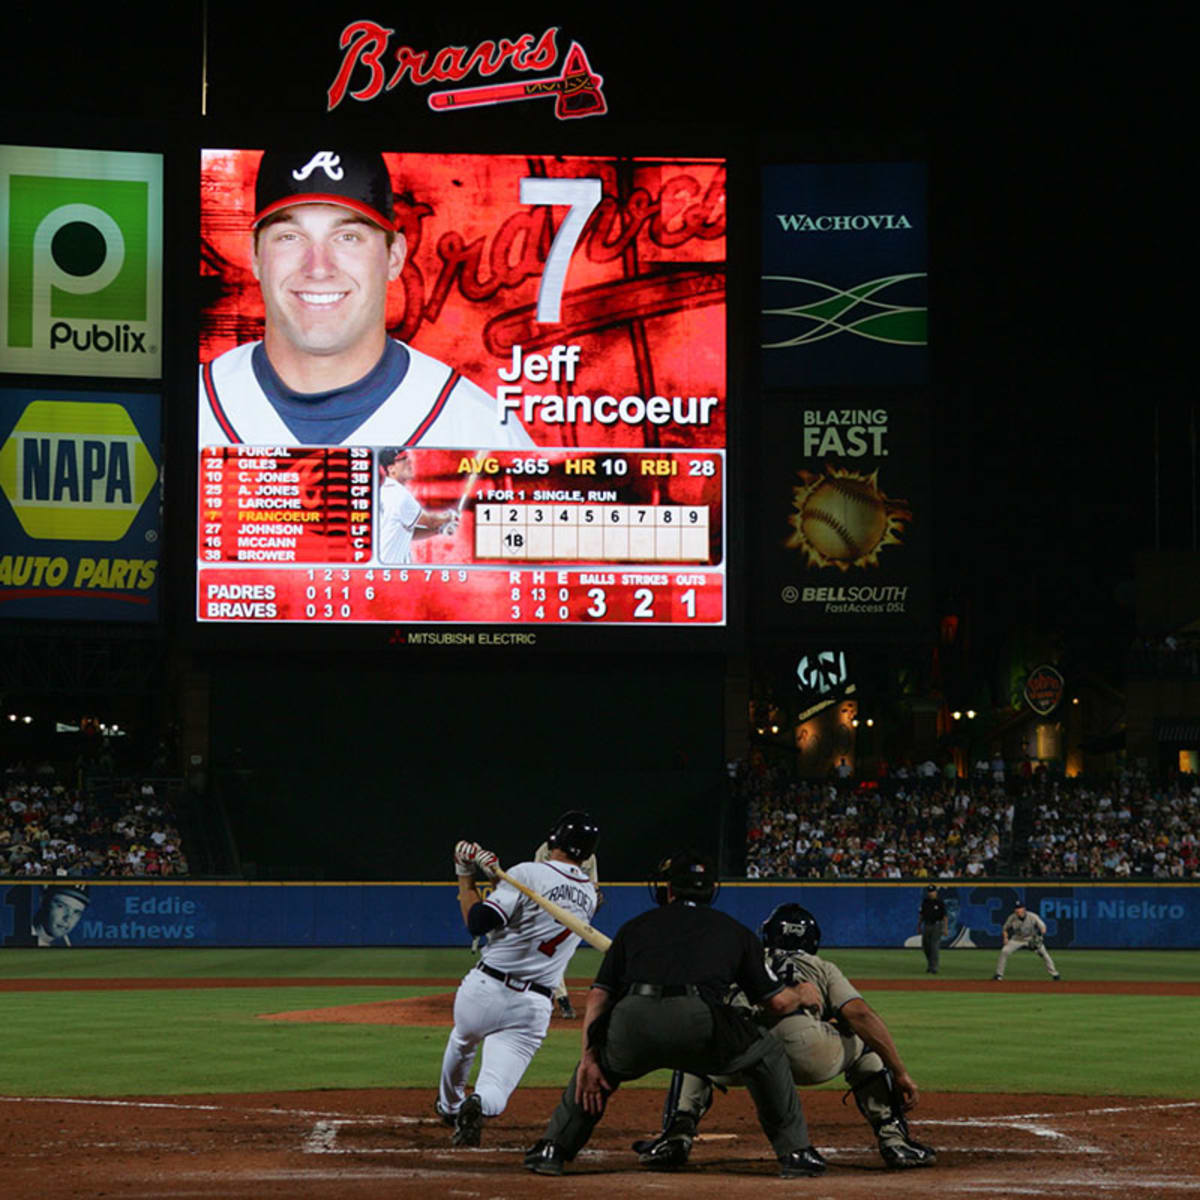 How Jeff Francoeur found his way to Braves broadcast job